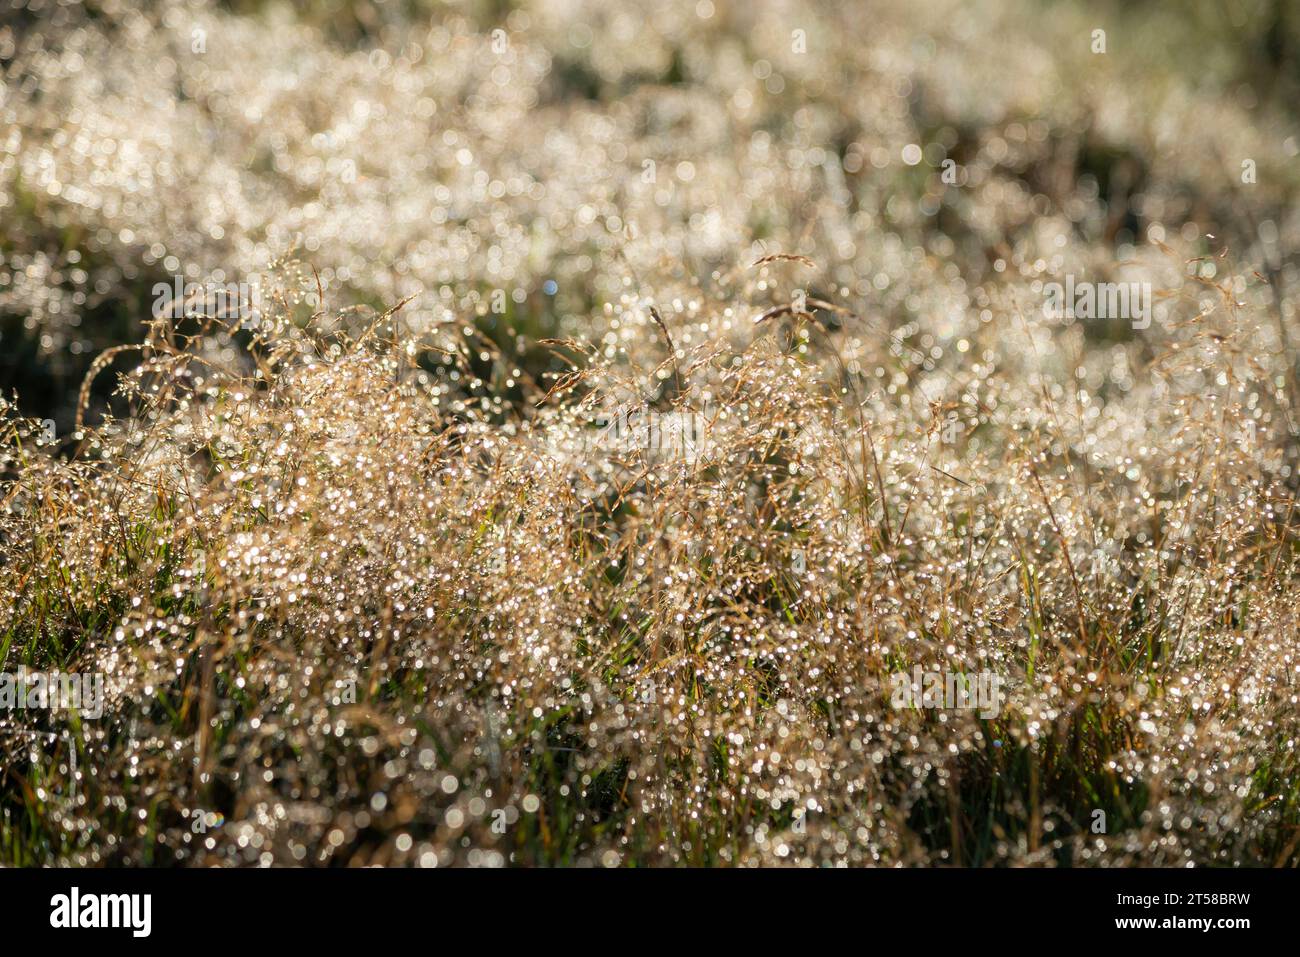 Fine moorland grasses sparkling with morning dew on a sunny autumn day. Stock Photo